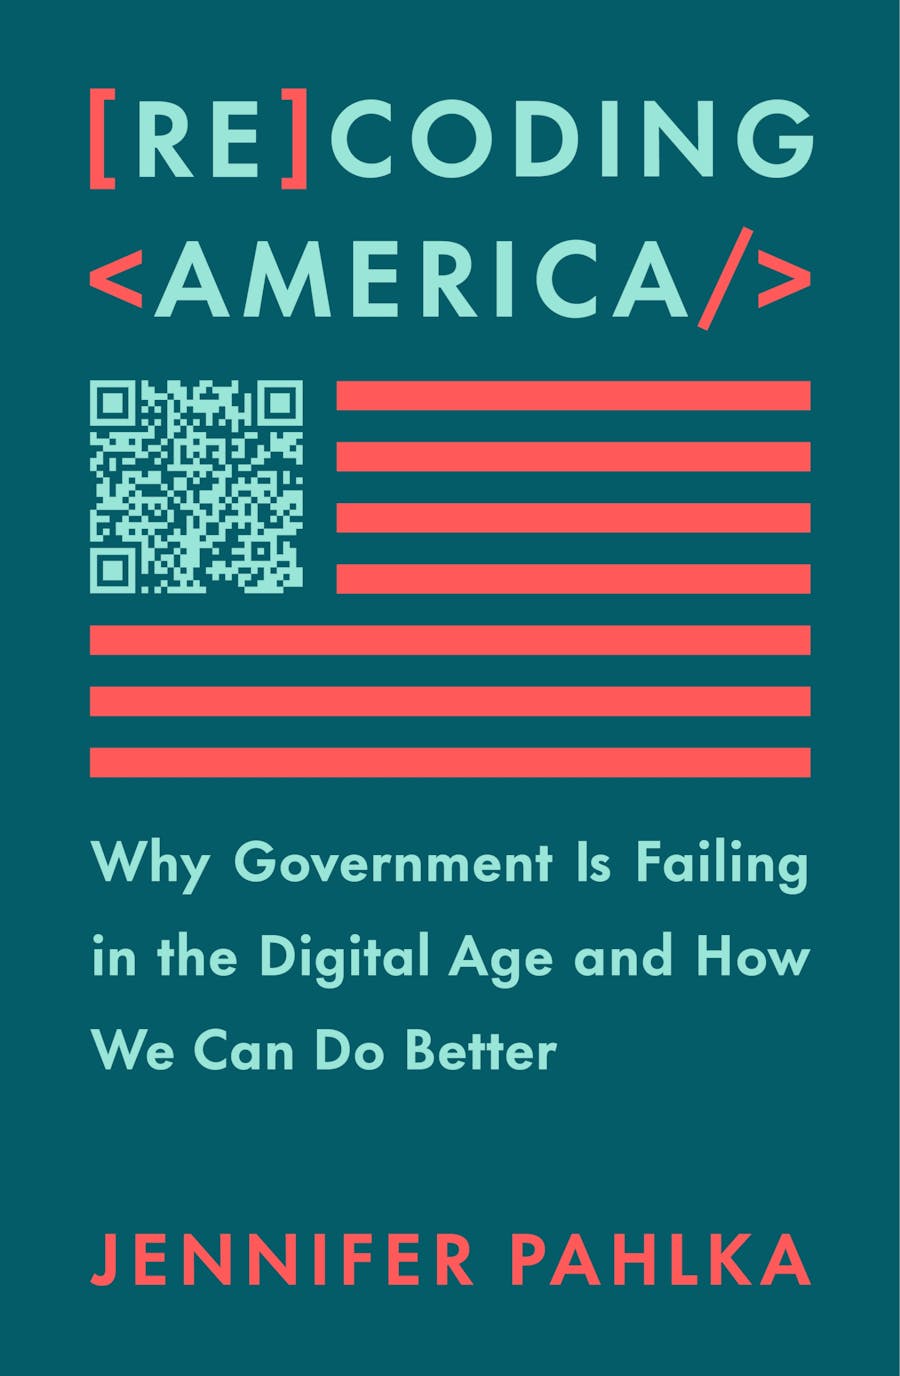 Book cover: Recoding America: Why Government Is Failing in the Digital Age and How We Can Do Better